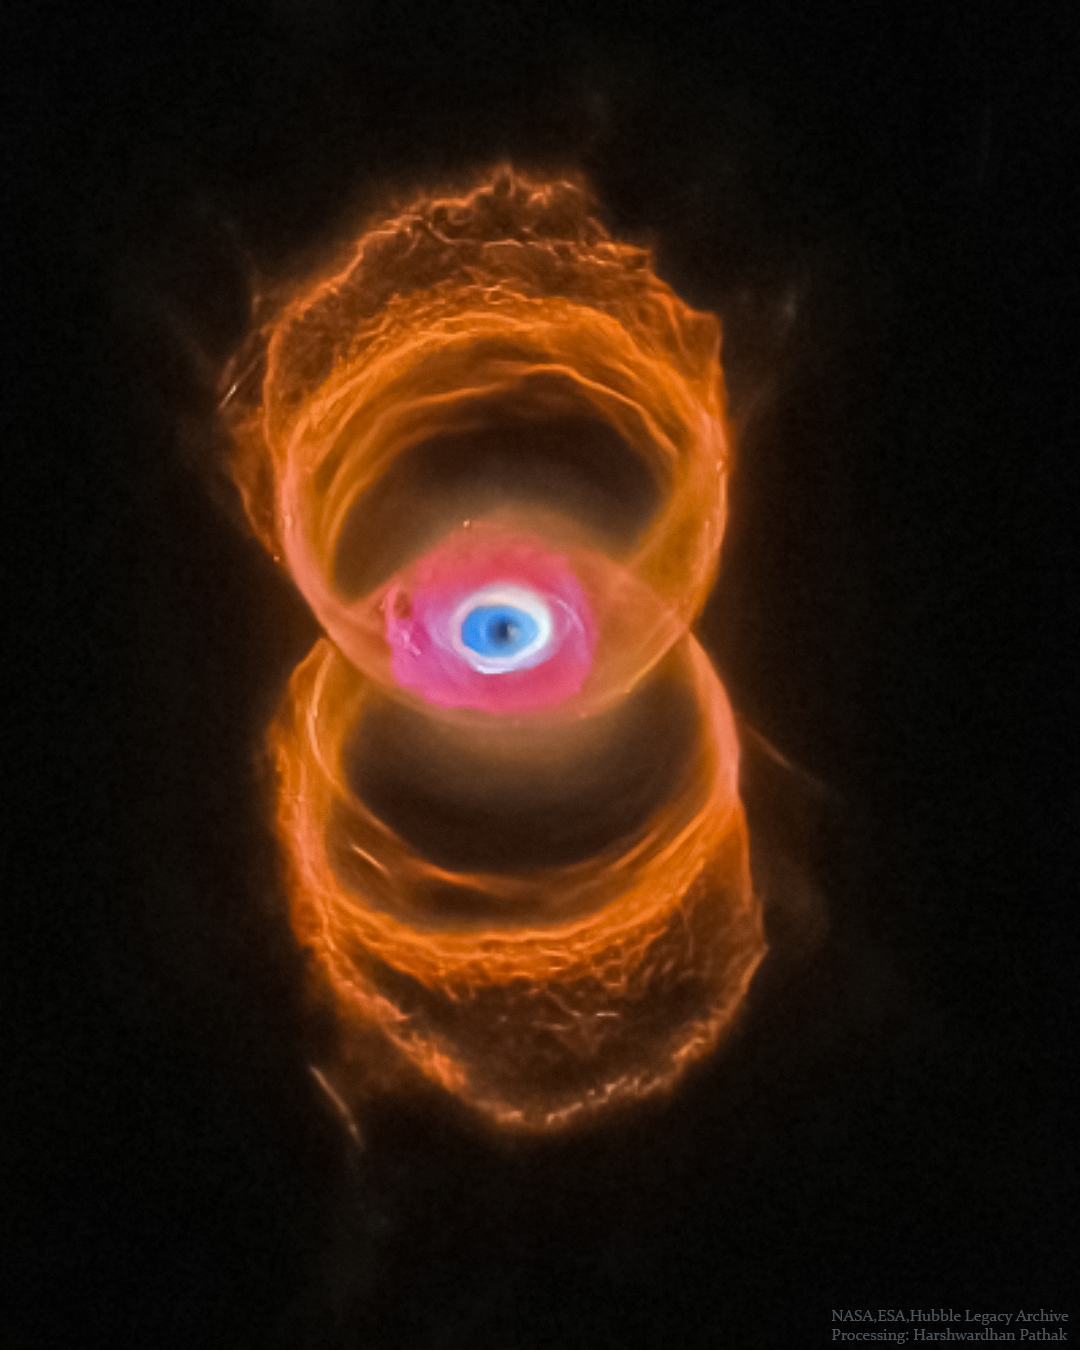 A vertical planetary nebula is shown in orange around the 
outside but with a blue glow in the center. The outside is 
shaped like a tilted hourglass, while the inside appears similar
to an eye.
Please see the explanation for more detailed information.